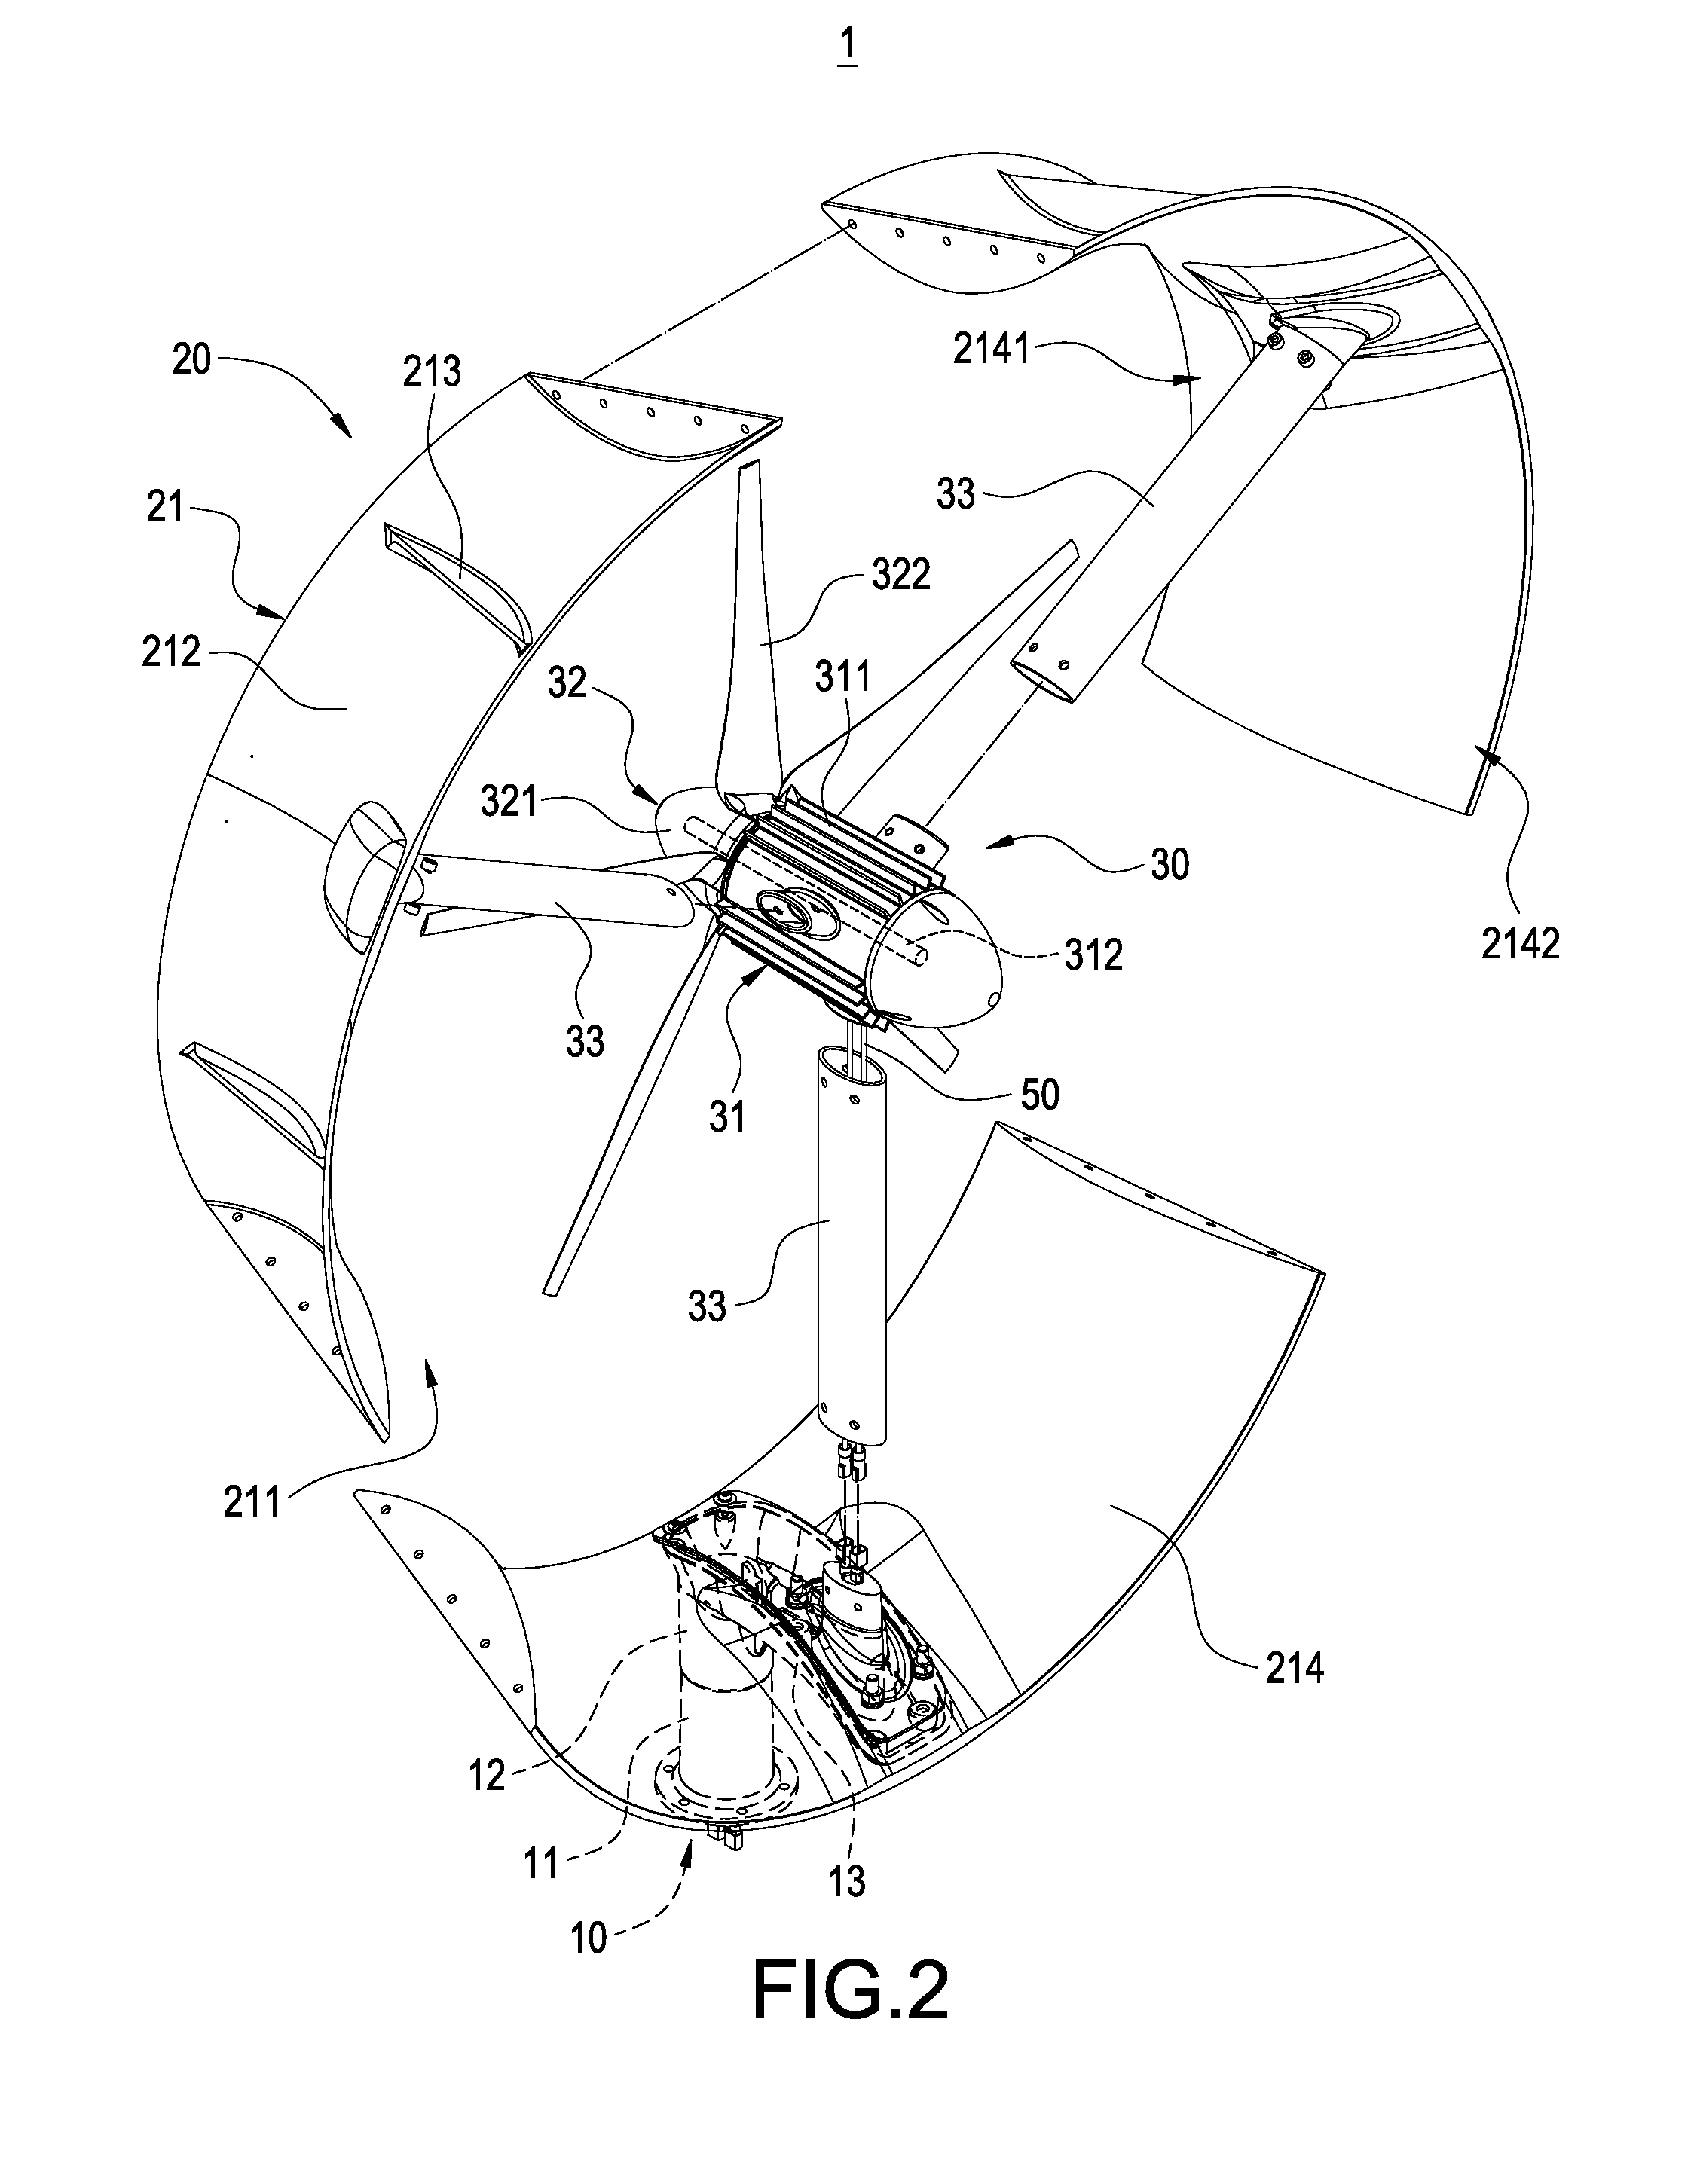 Wind-power generating device with automatic adjustment to wind direction